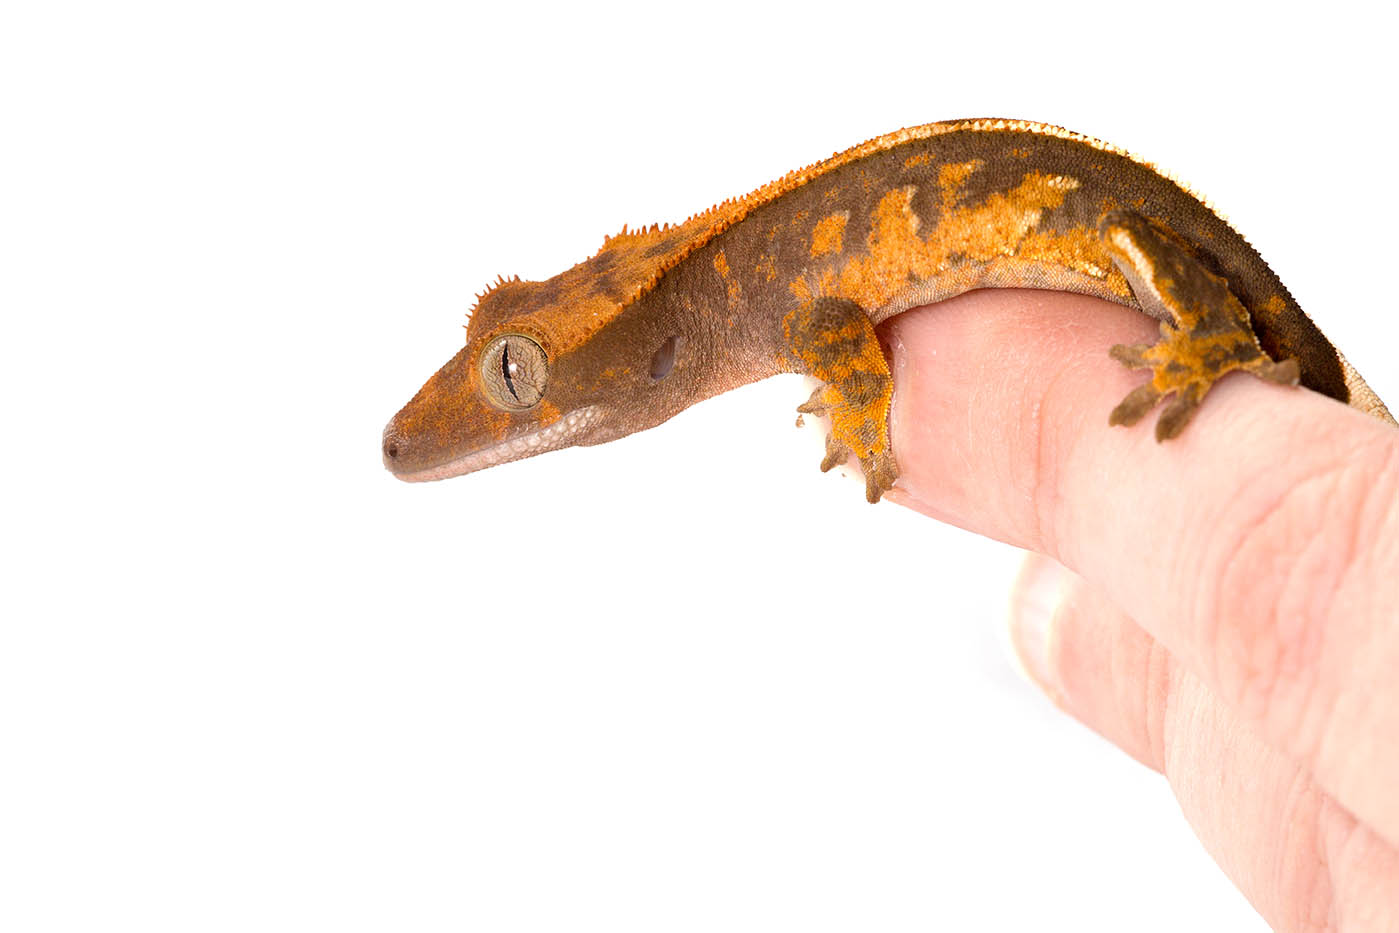 harlequin crested gecko on person's hand